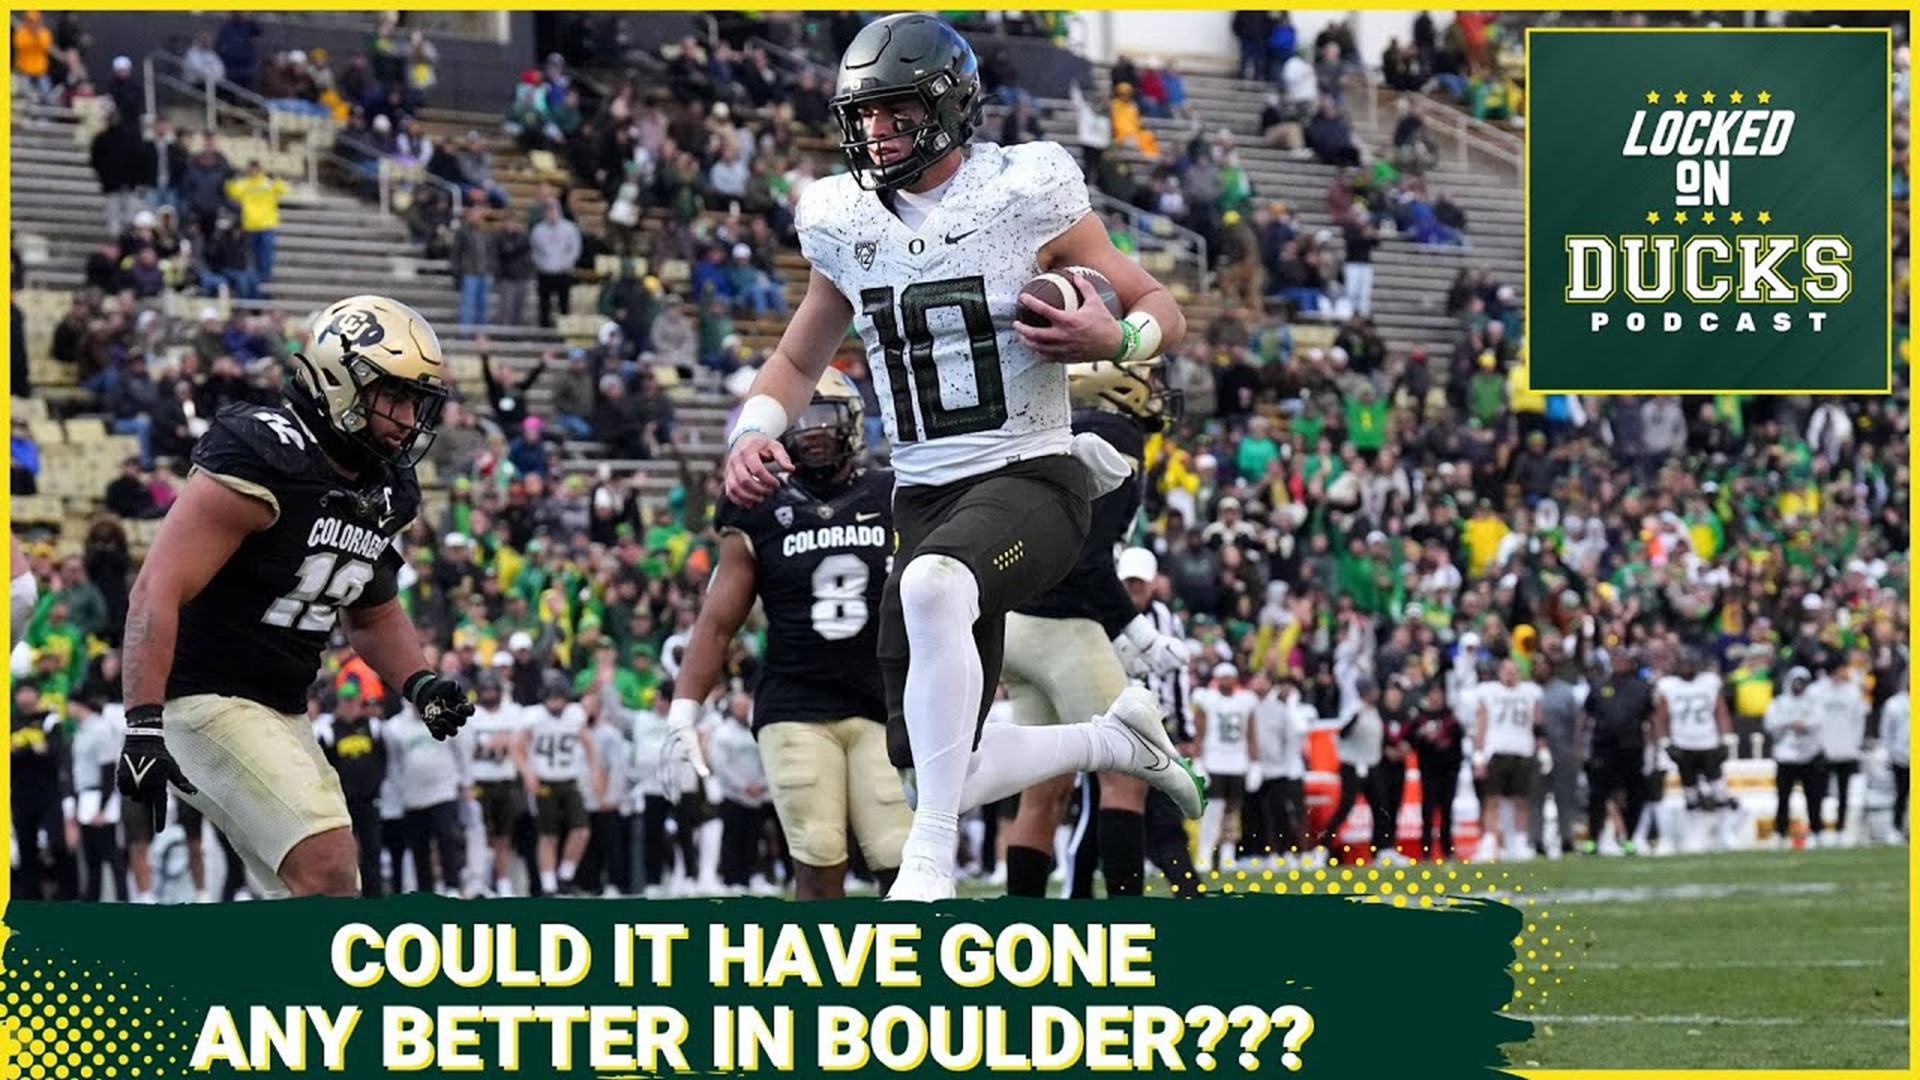 What went well in the win against Colorado and what can still improve for Oregon heading into their big rivalry game against Washington?